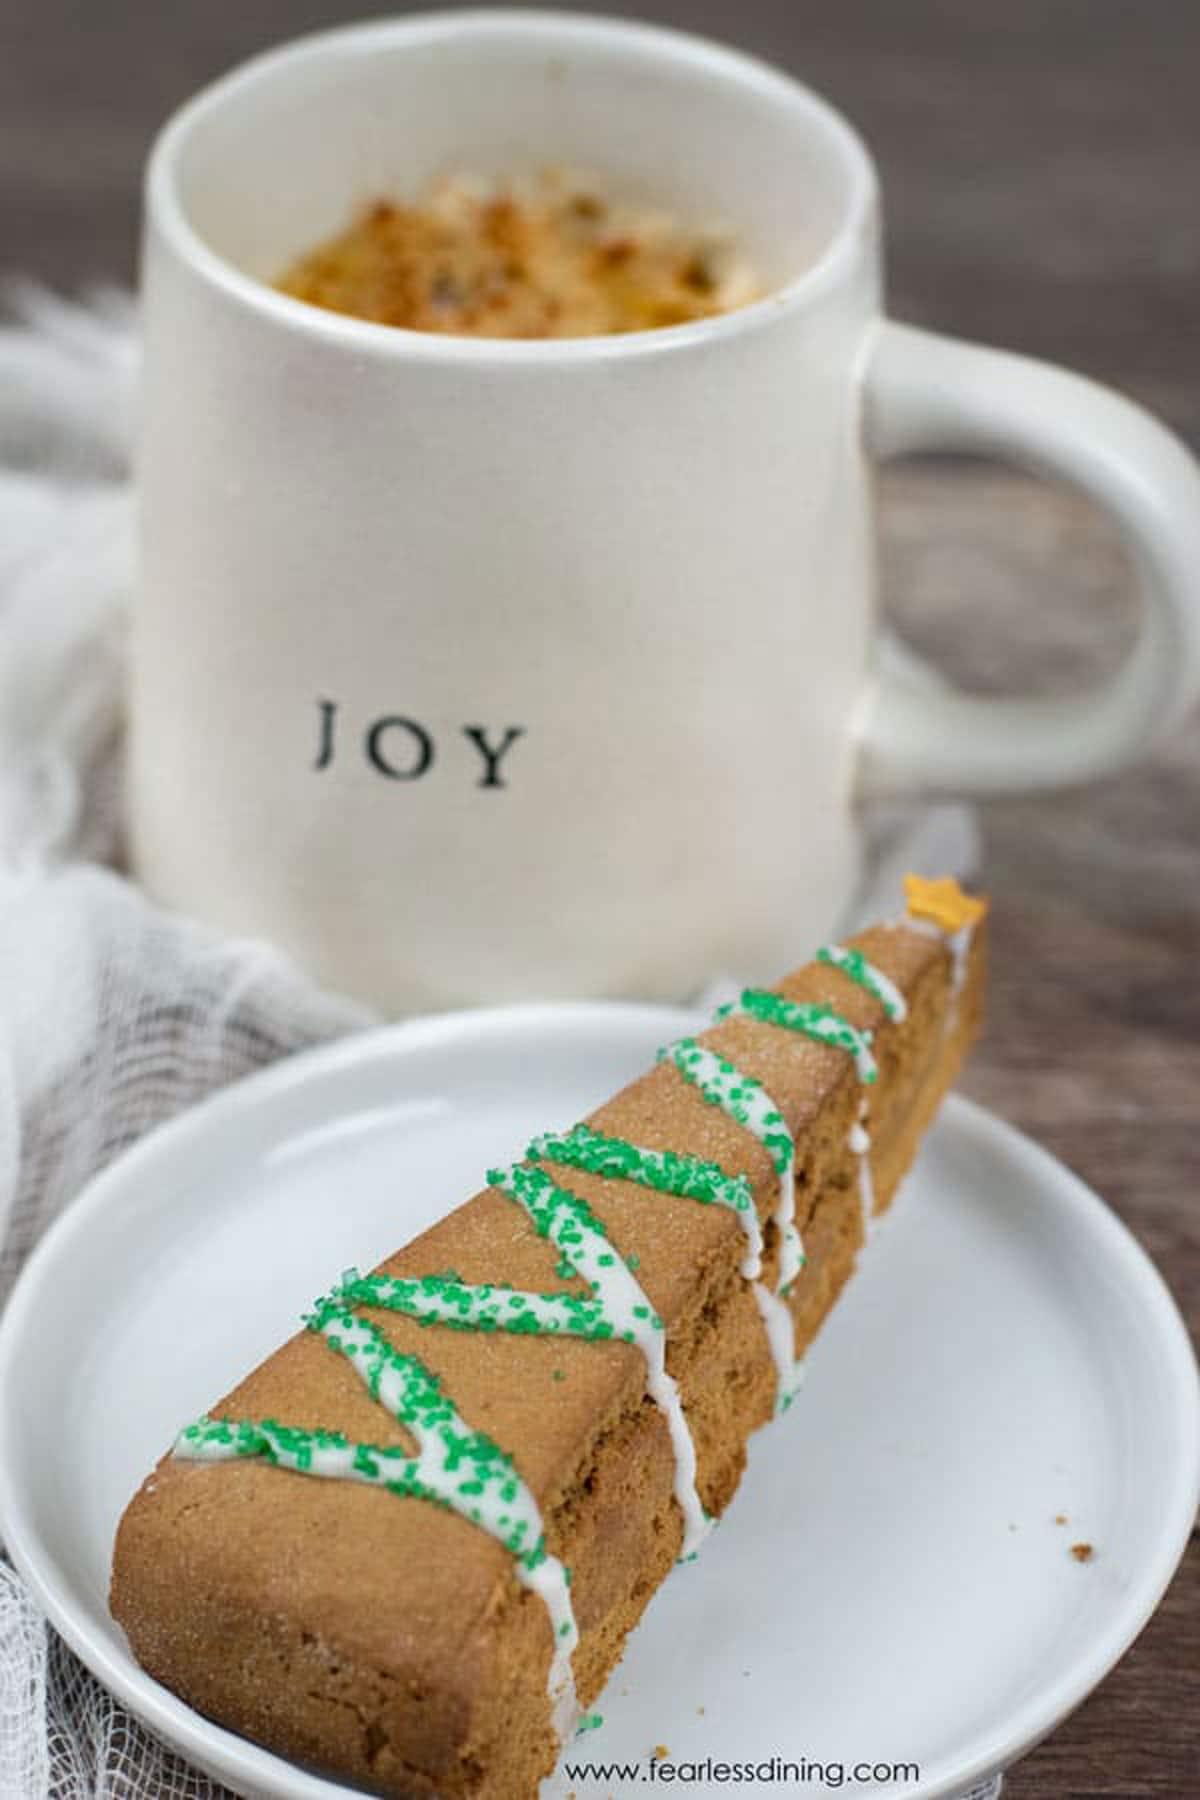 a gingerbread biscotti on a plate next to a mug of coffee